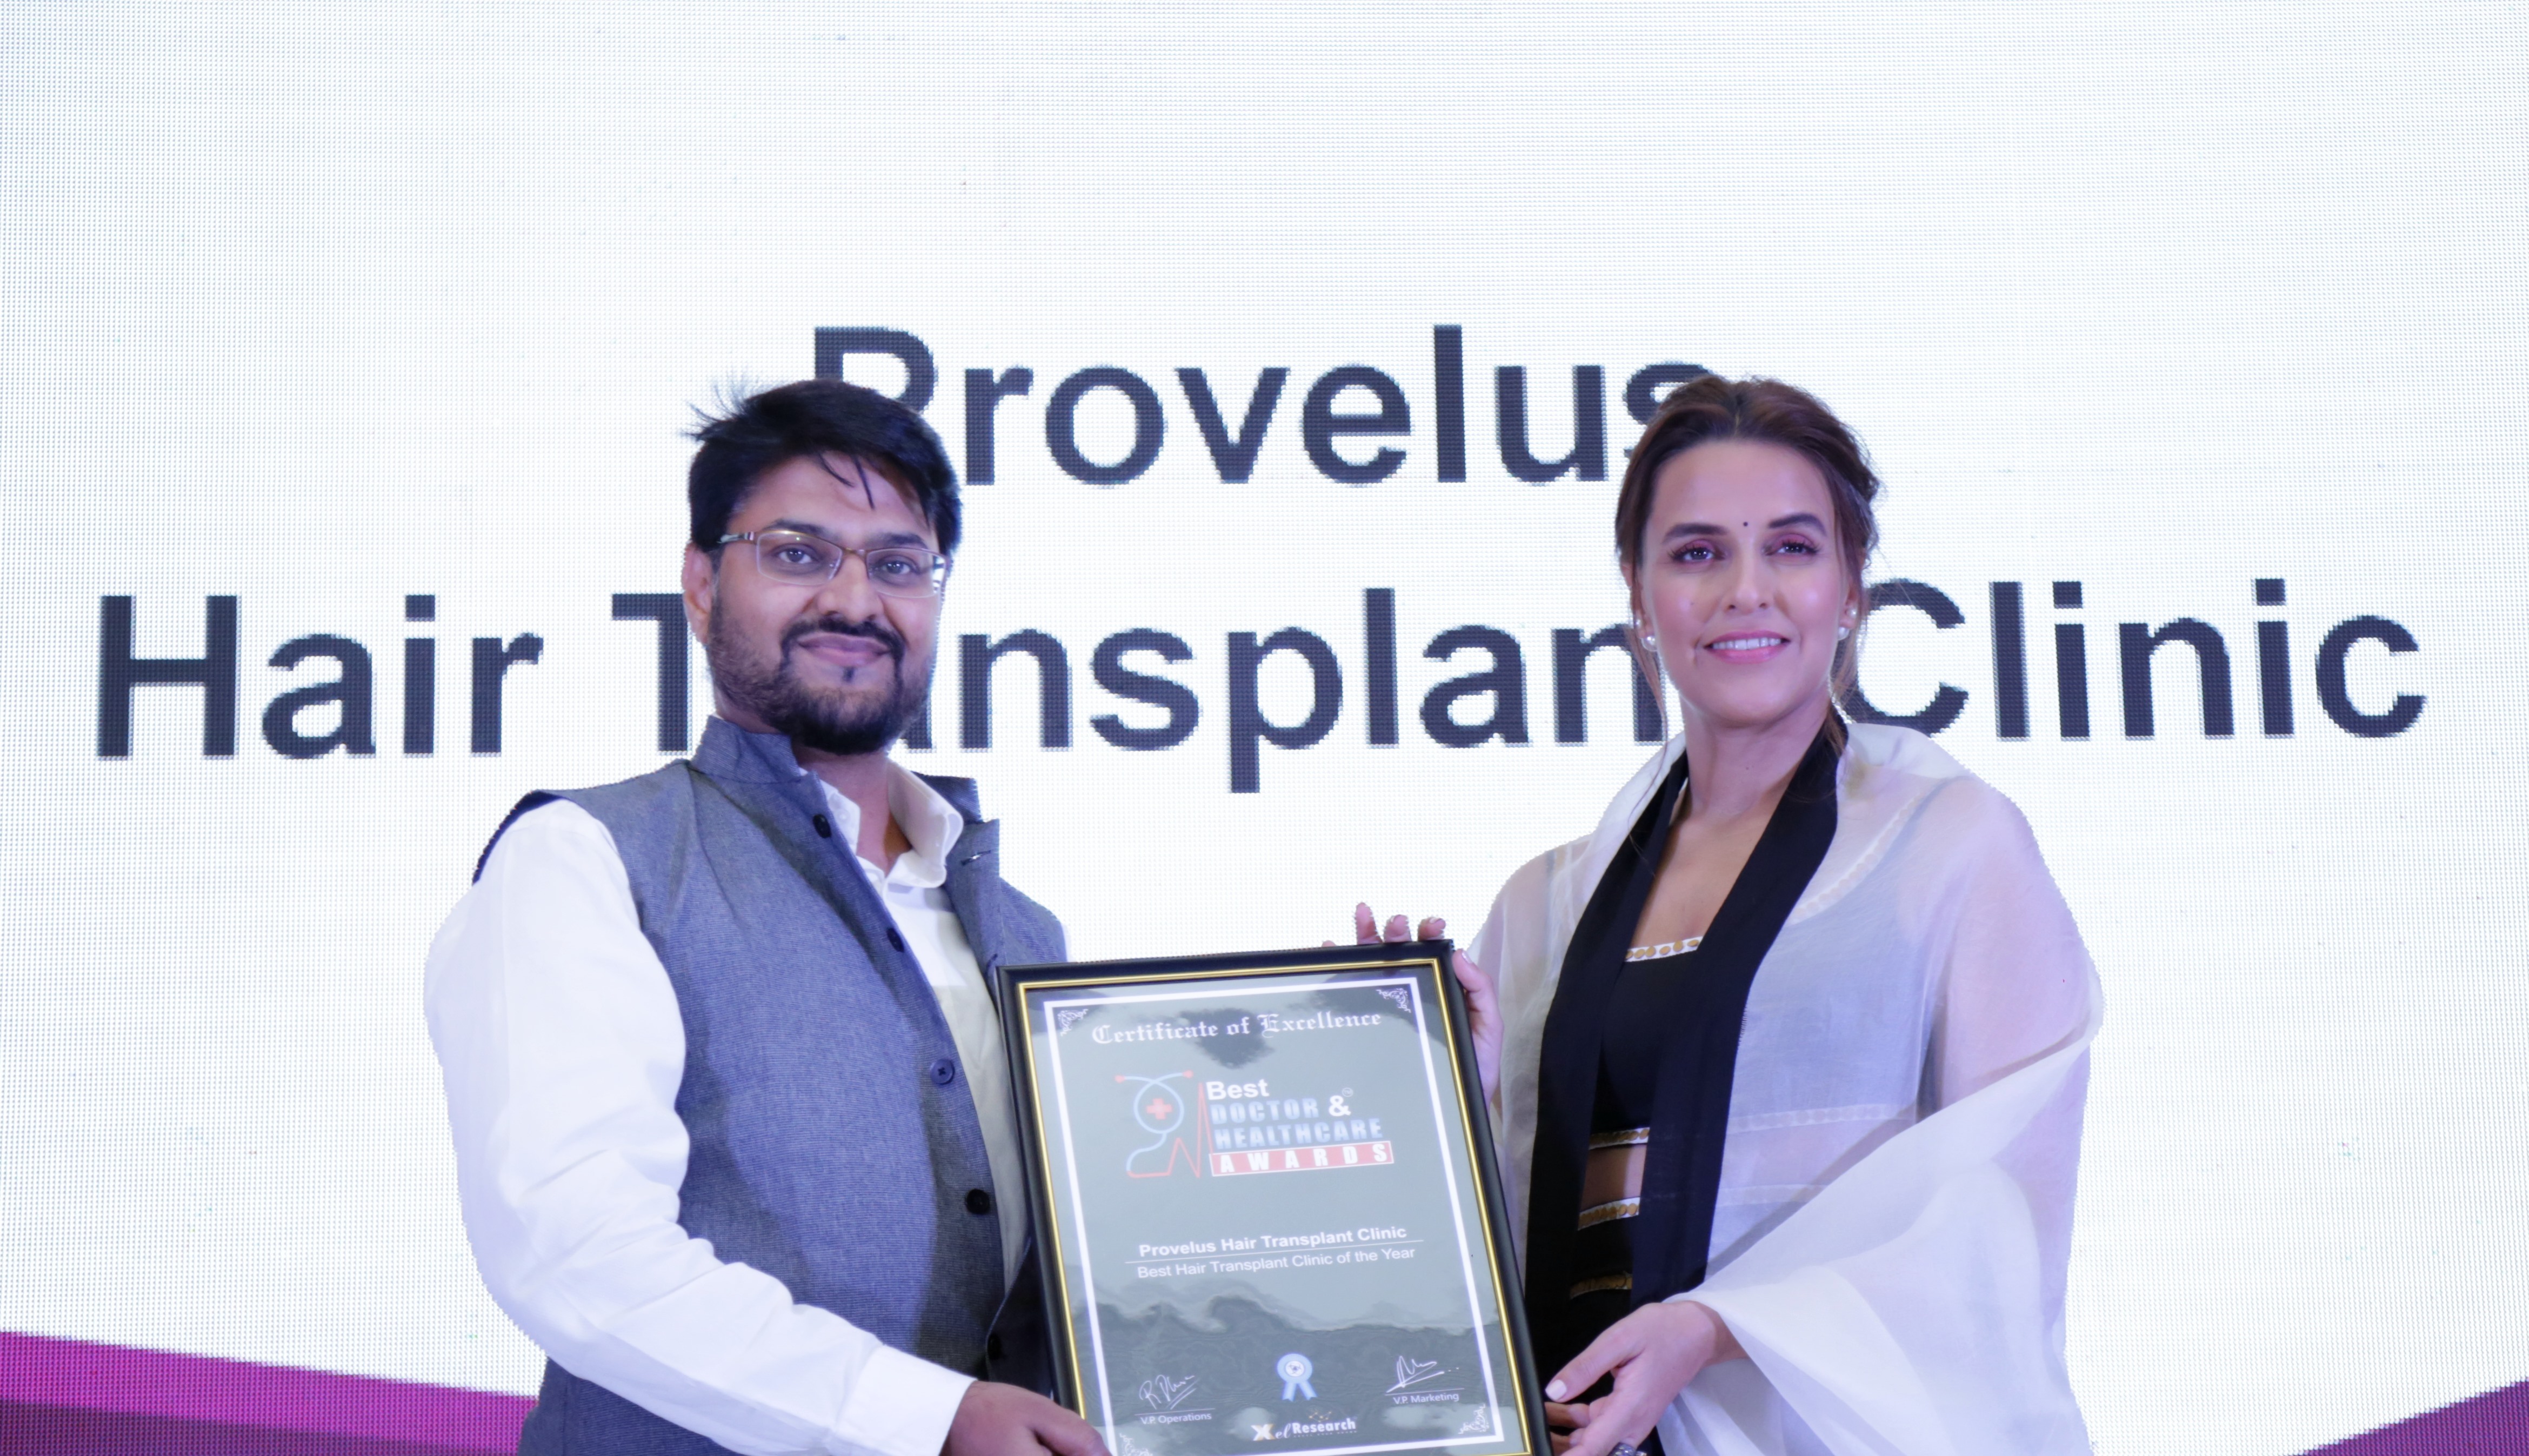 India Top doctor award for hair transplant presented to Dr. Sharad Mishra